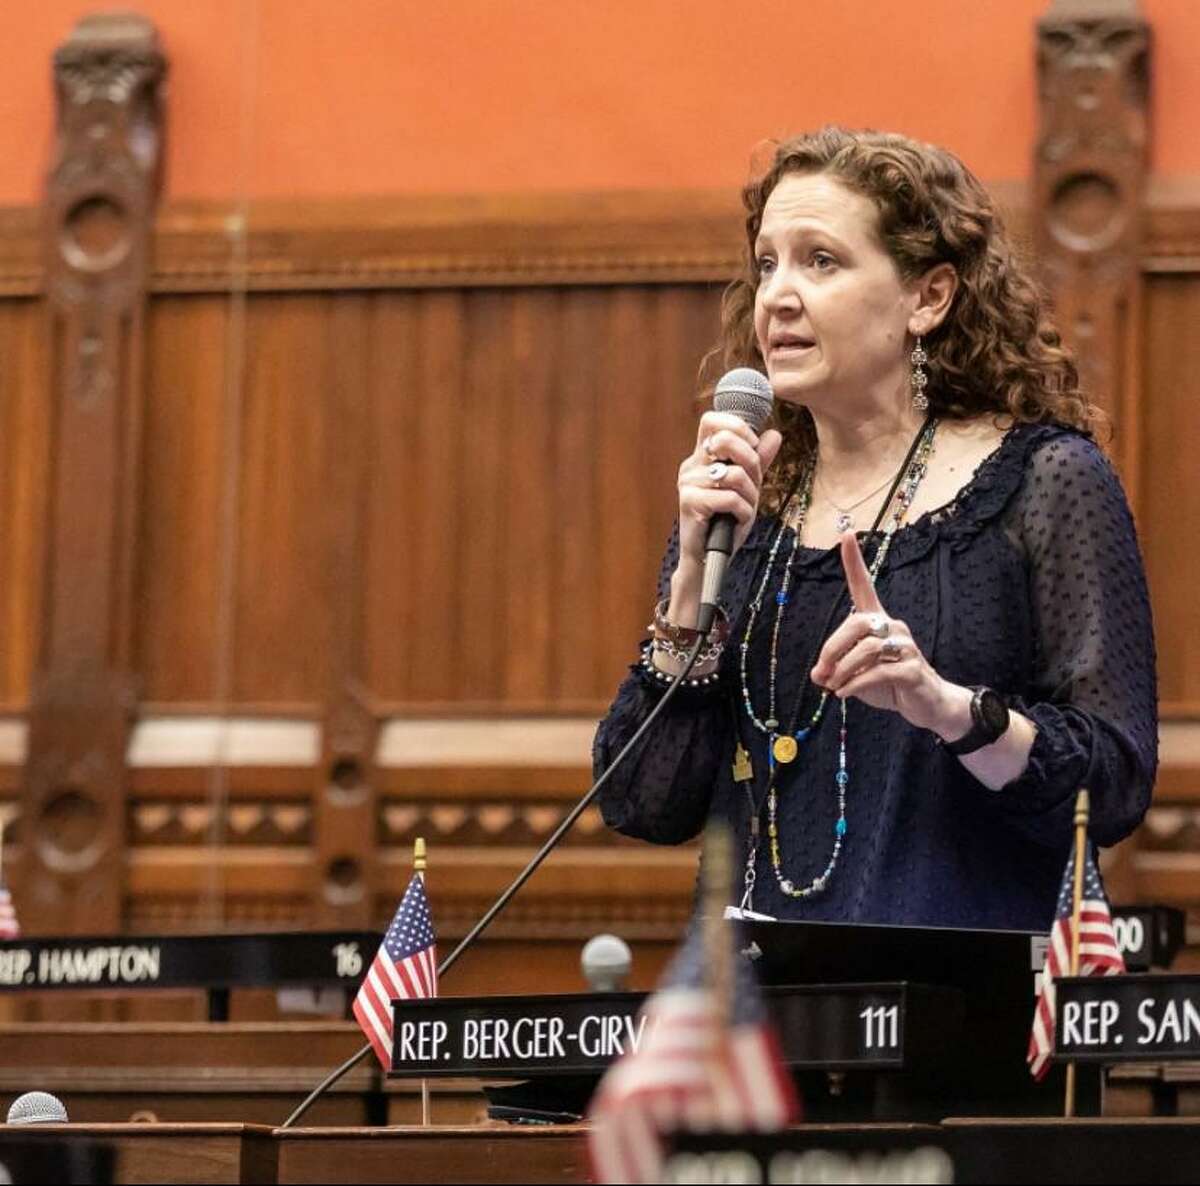 State Rep. Aimee Berger-Girvalo last week announced her reelection campaign to represent Ridgefield in the General Assembly in Hartford. Pictured, Berger-Girvalo speaks on the House floor.